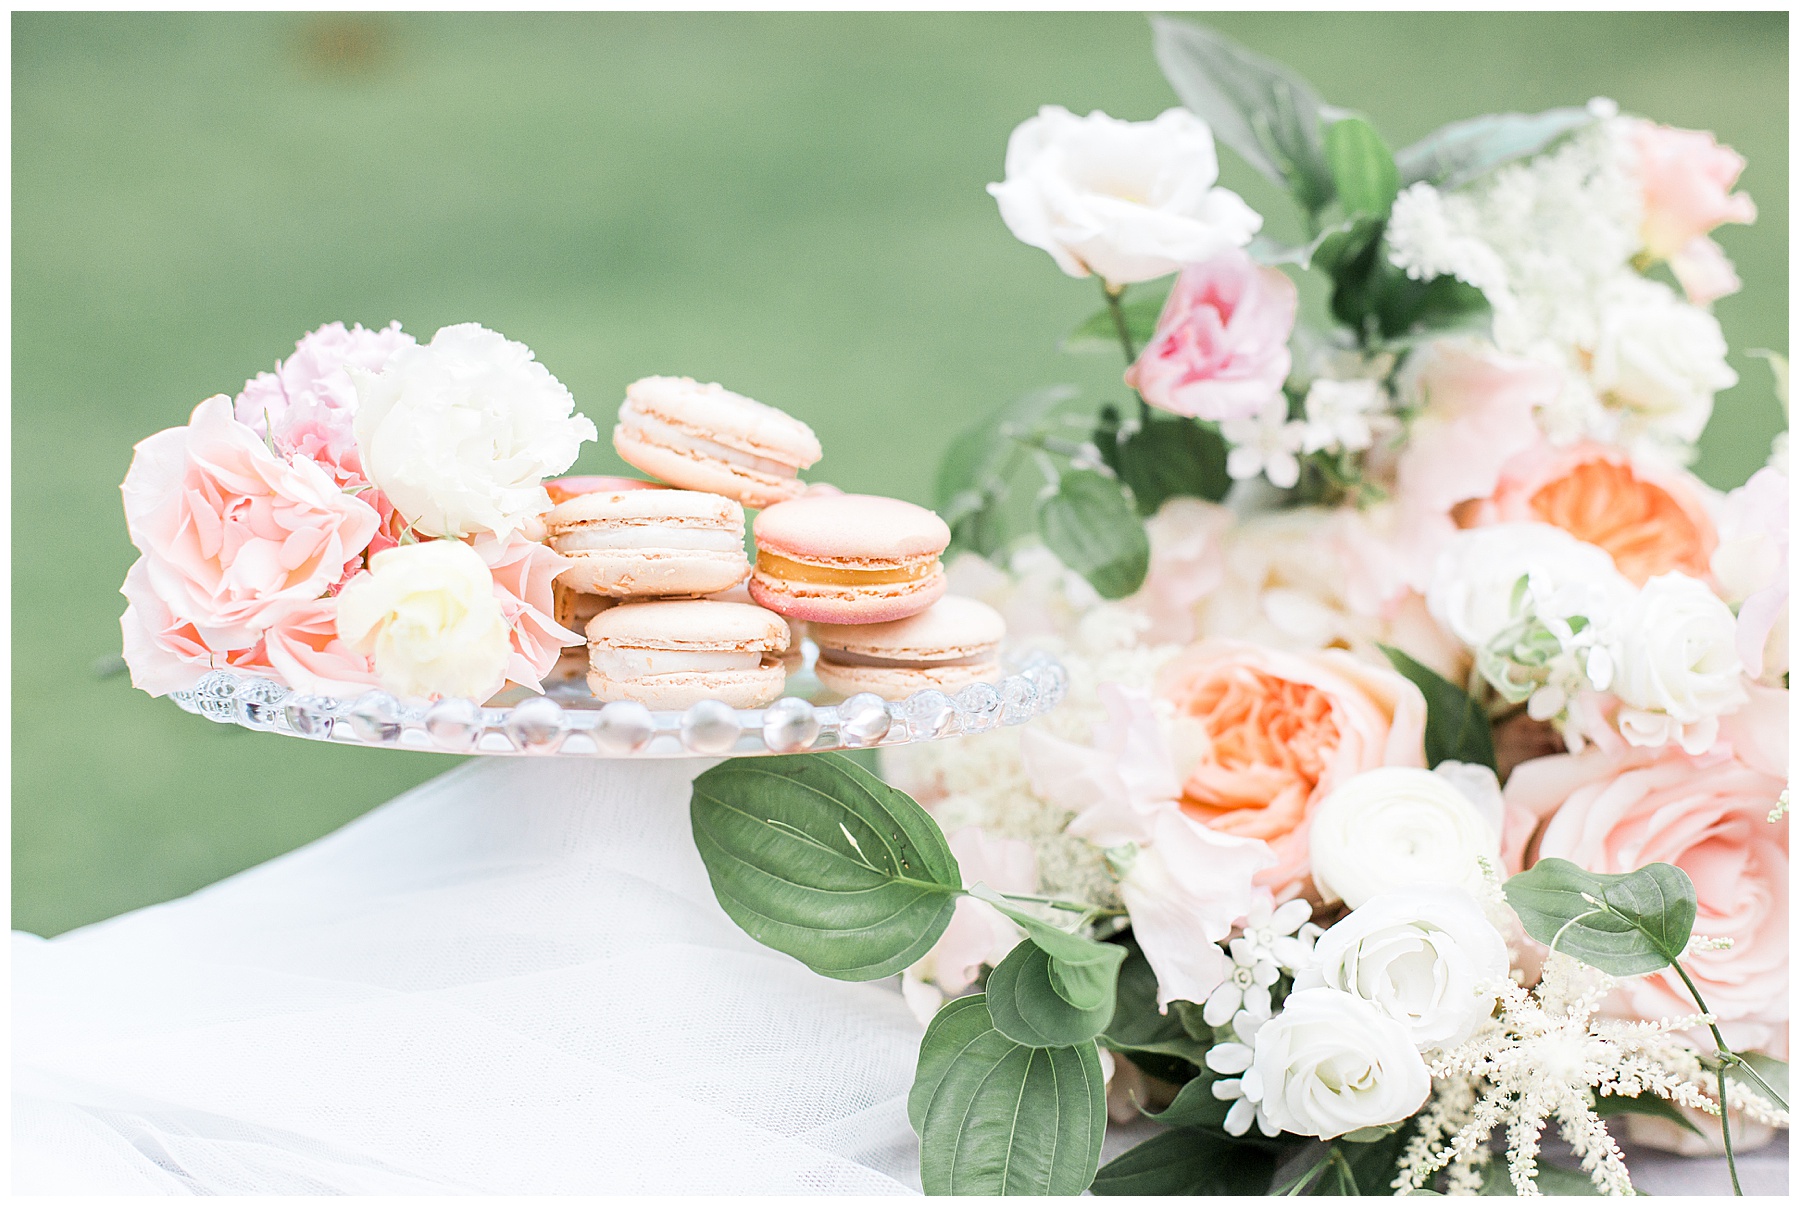 macarons and wedding bouquet central park new york